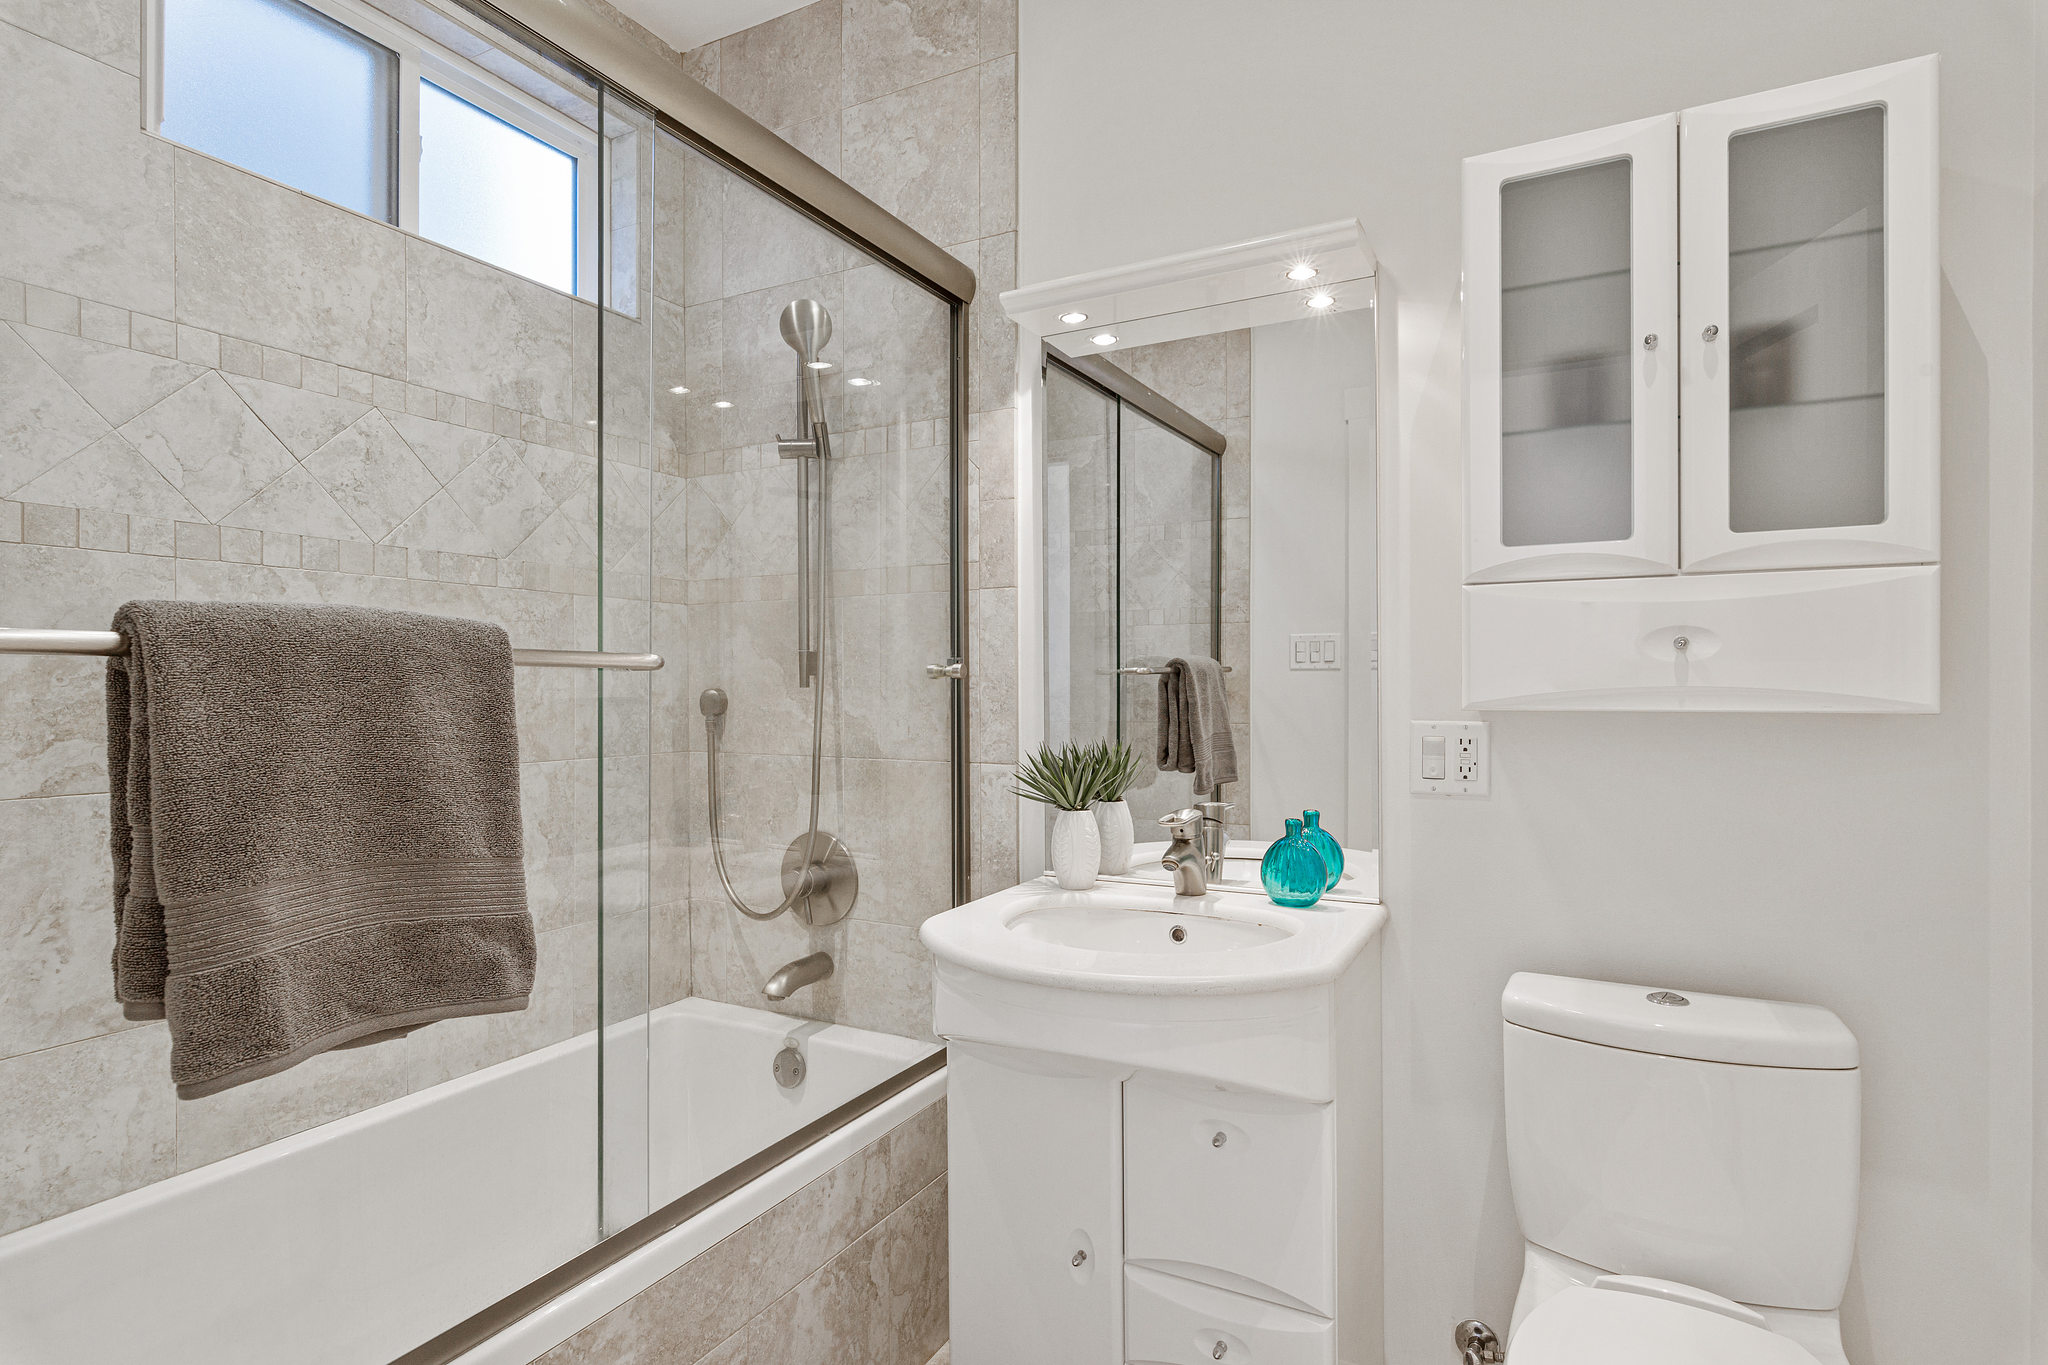 Property Photo: Bathroom, with glass shower